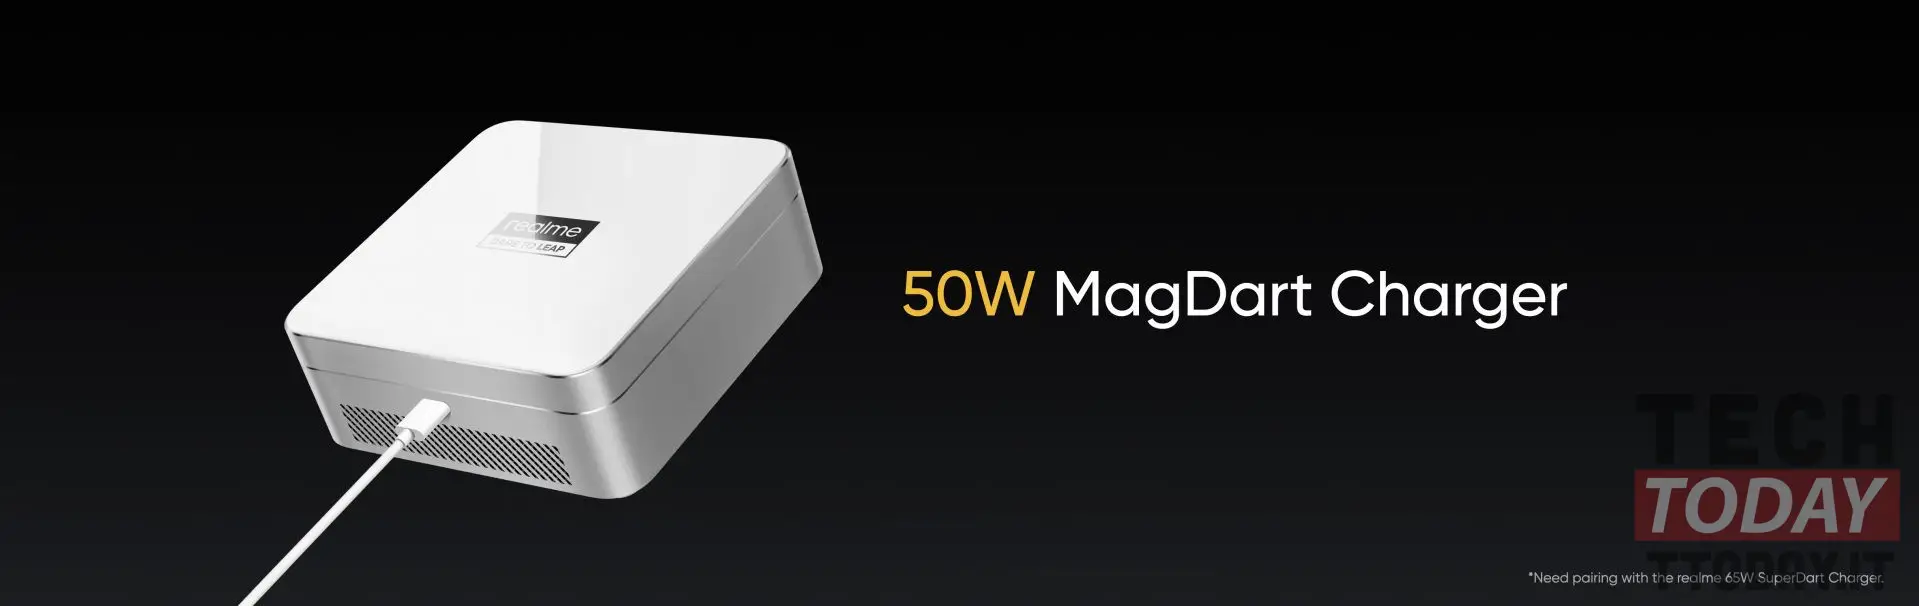 realme magdart 50w: caricabatterie wireless magnetico